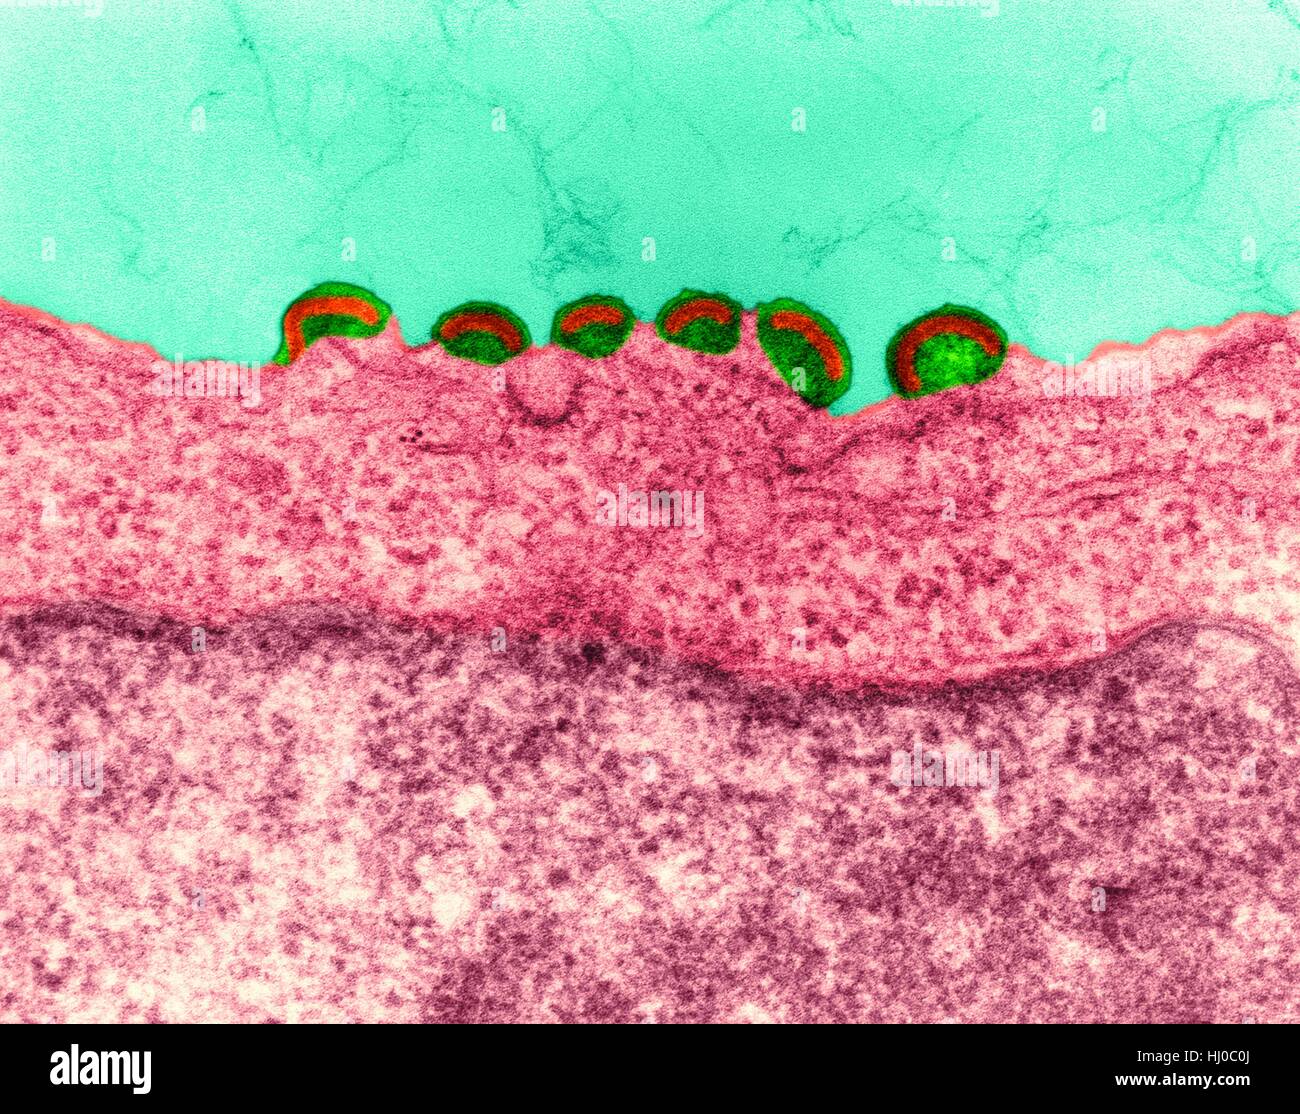 HIV infection,coloured transmission electron micrograph (TEM).Mature virus budding release of HIV in human lymph tissue (RNA virus,Retroviridae Family).In retroviruses nucleocapsid buds directly through cytoplasmic membrane.This produces enveloped virion during release process.HIV (human Stock Photo